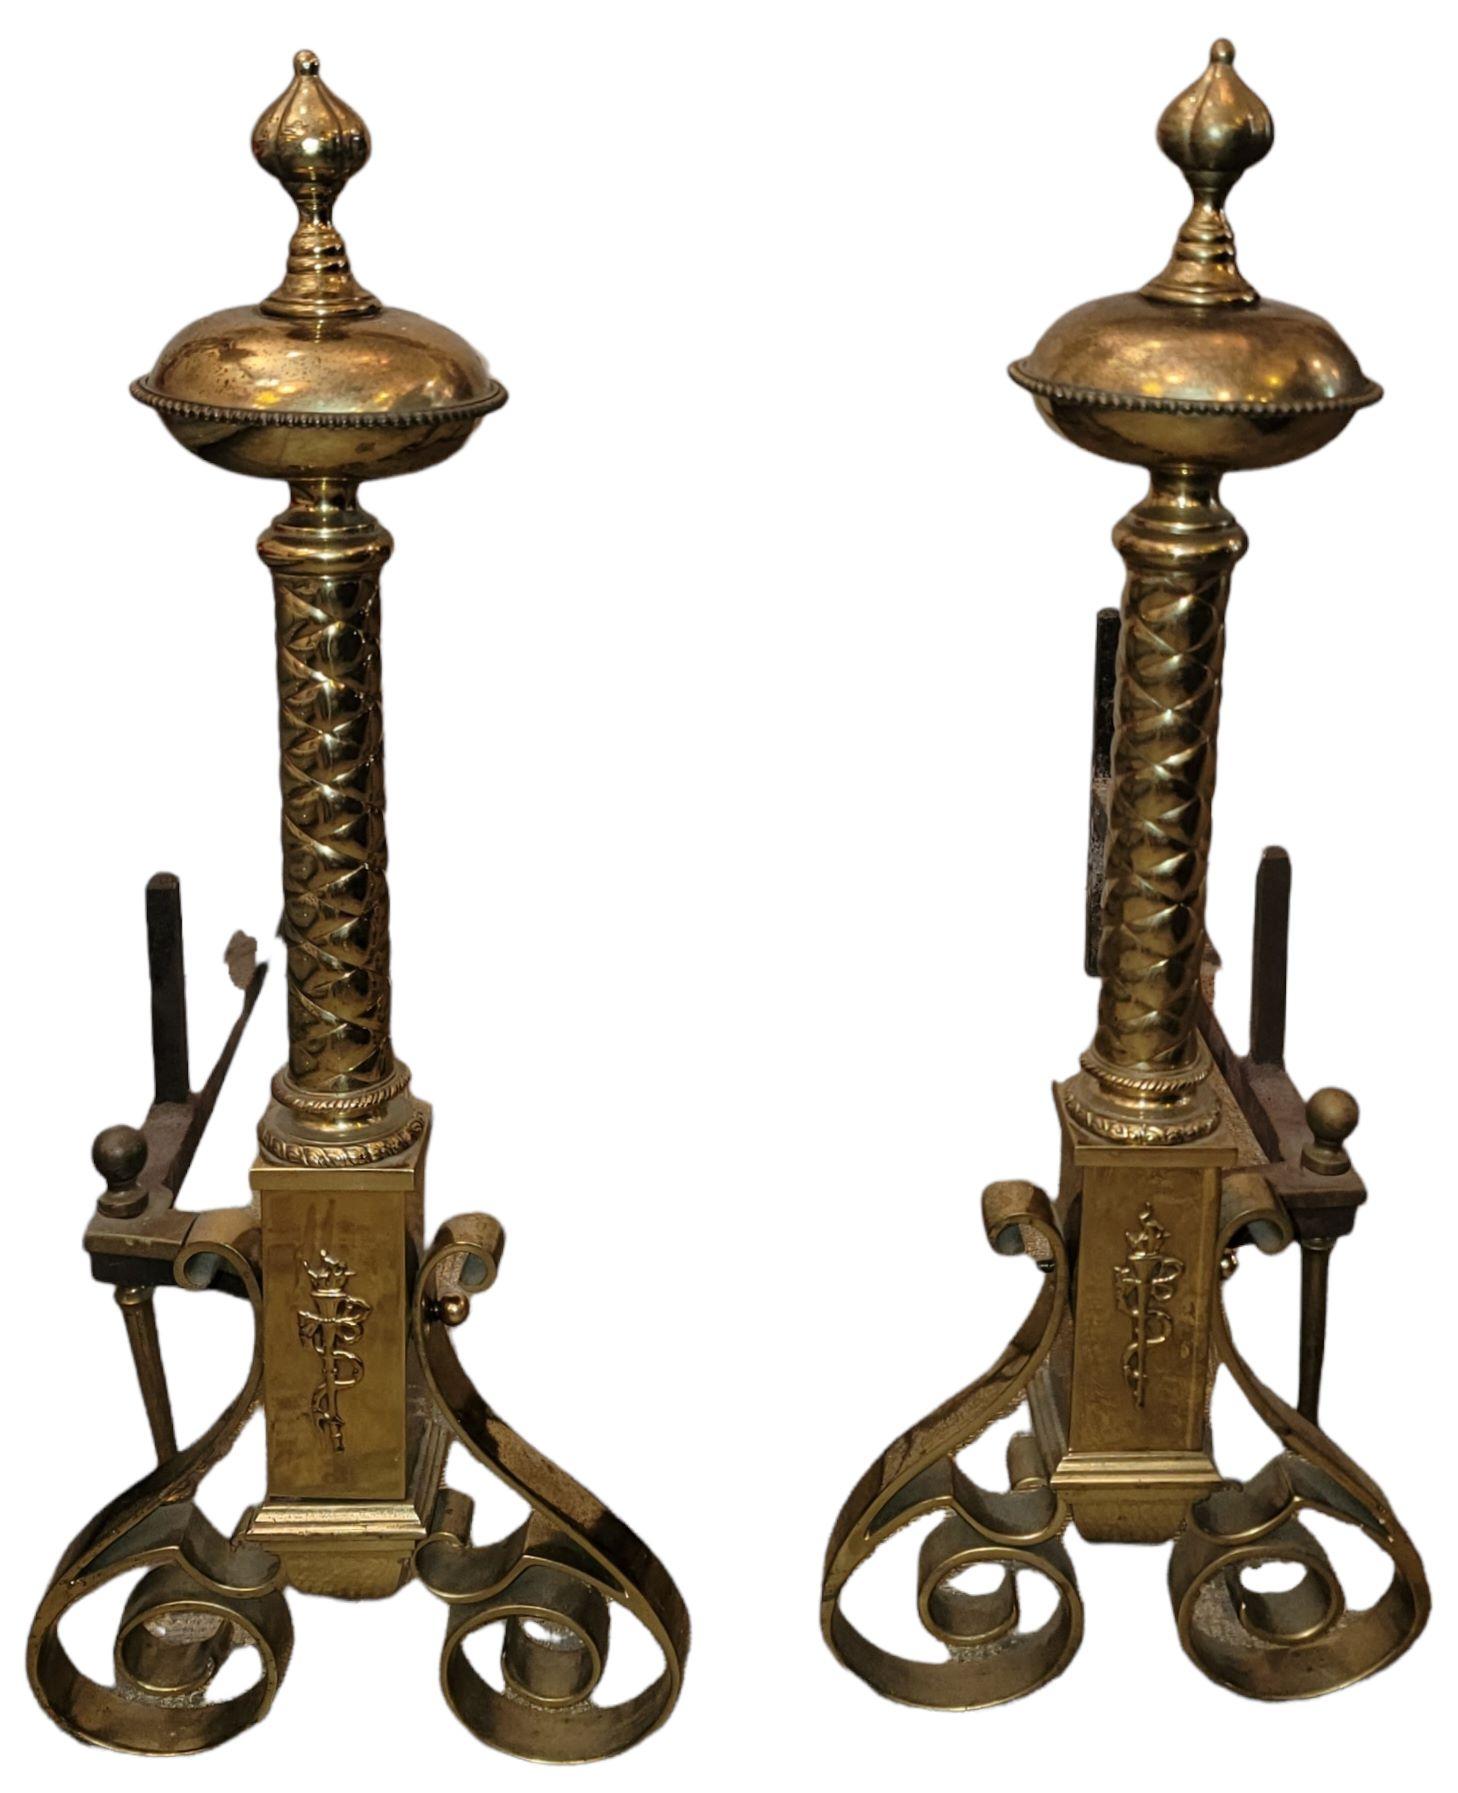 Mid-20th Century Early 20th Century Italian Fireplace Andiron and Chenet, 3 Piece Set For Sale